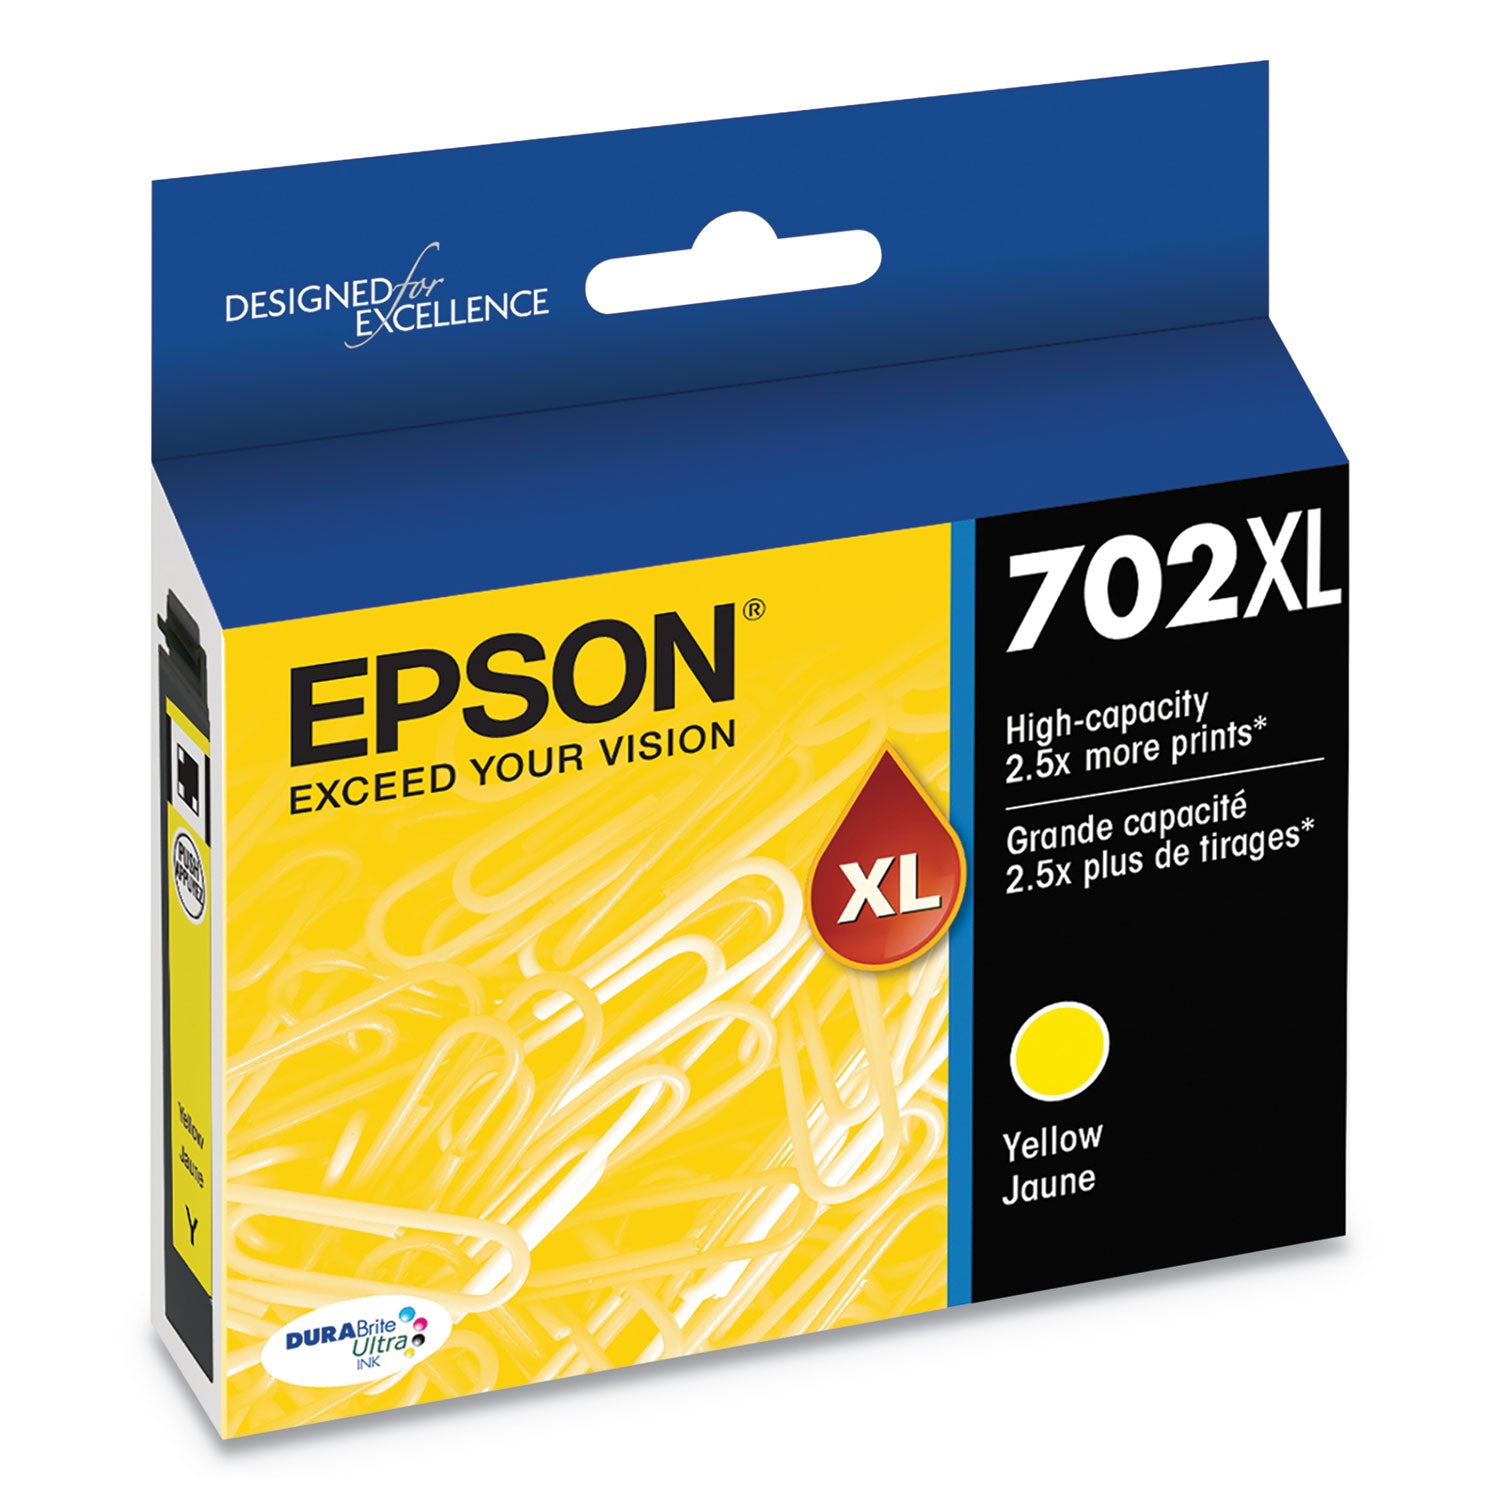 t702xl420-s-702xl-durabrite-ultra-high-yield-ink-950-page-yield-yellow_epst702xl420s - 2